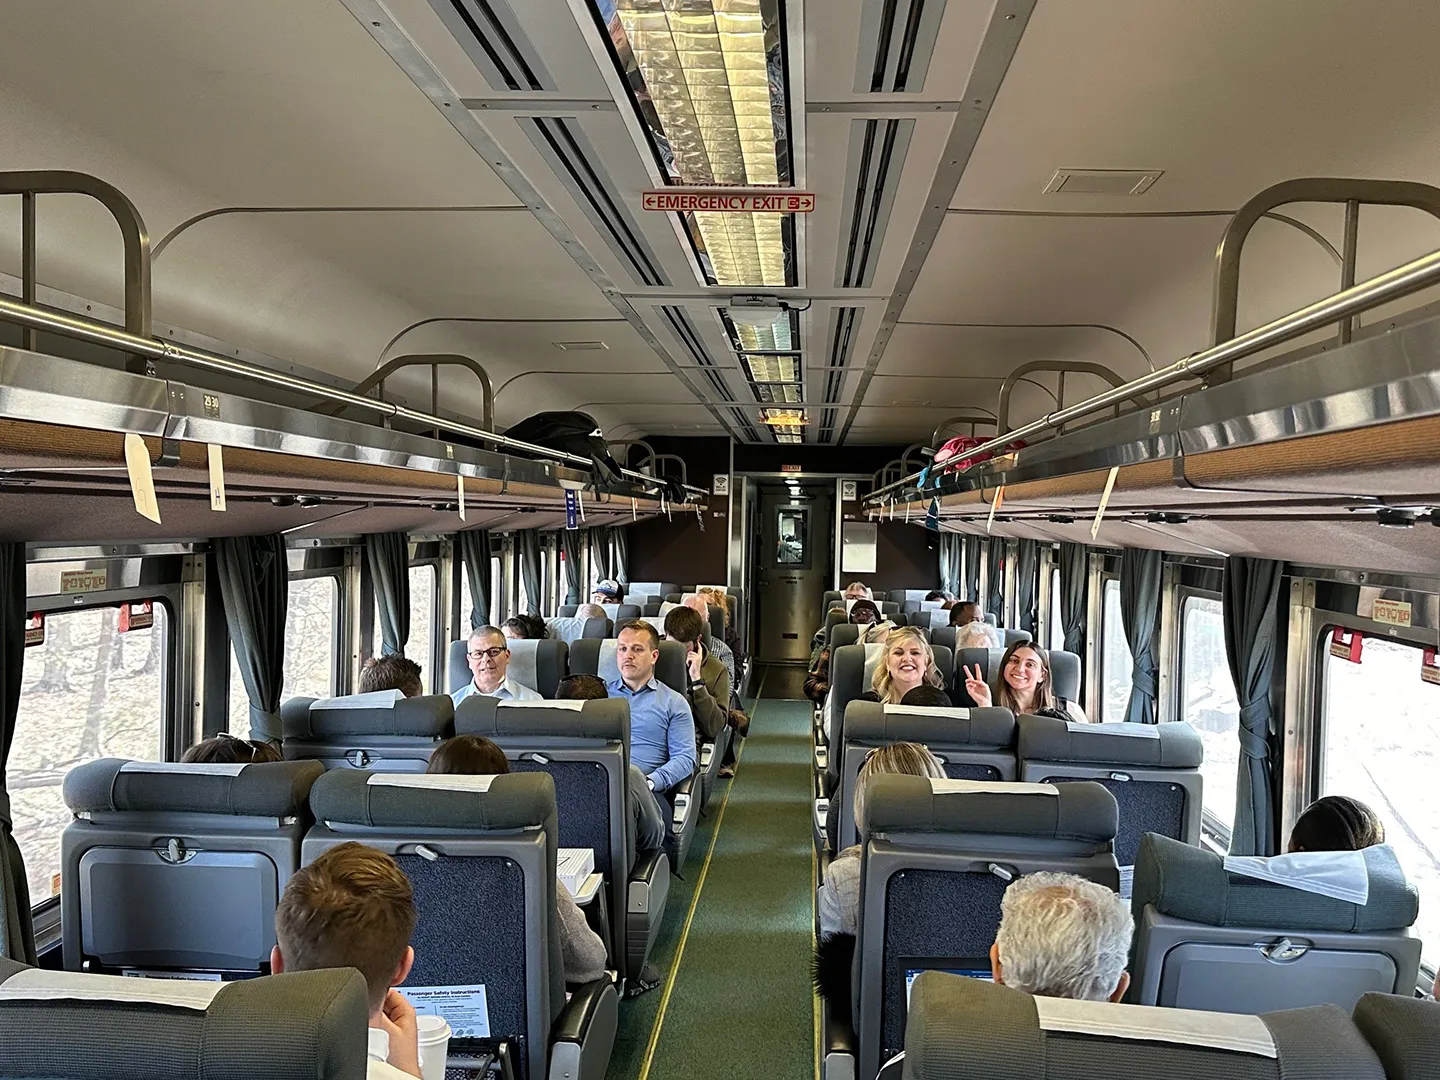 Our Raleigh and Charlotte office staff recently used the train to commute to an internal meeting in High Point.